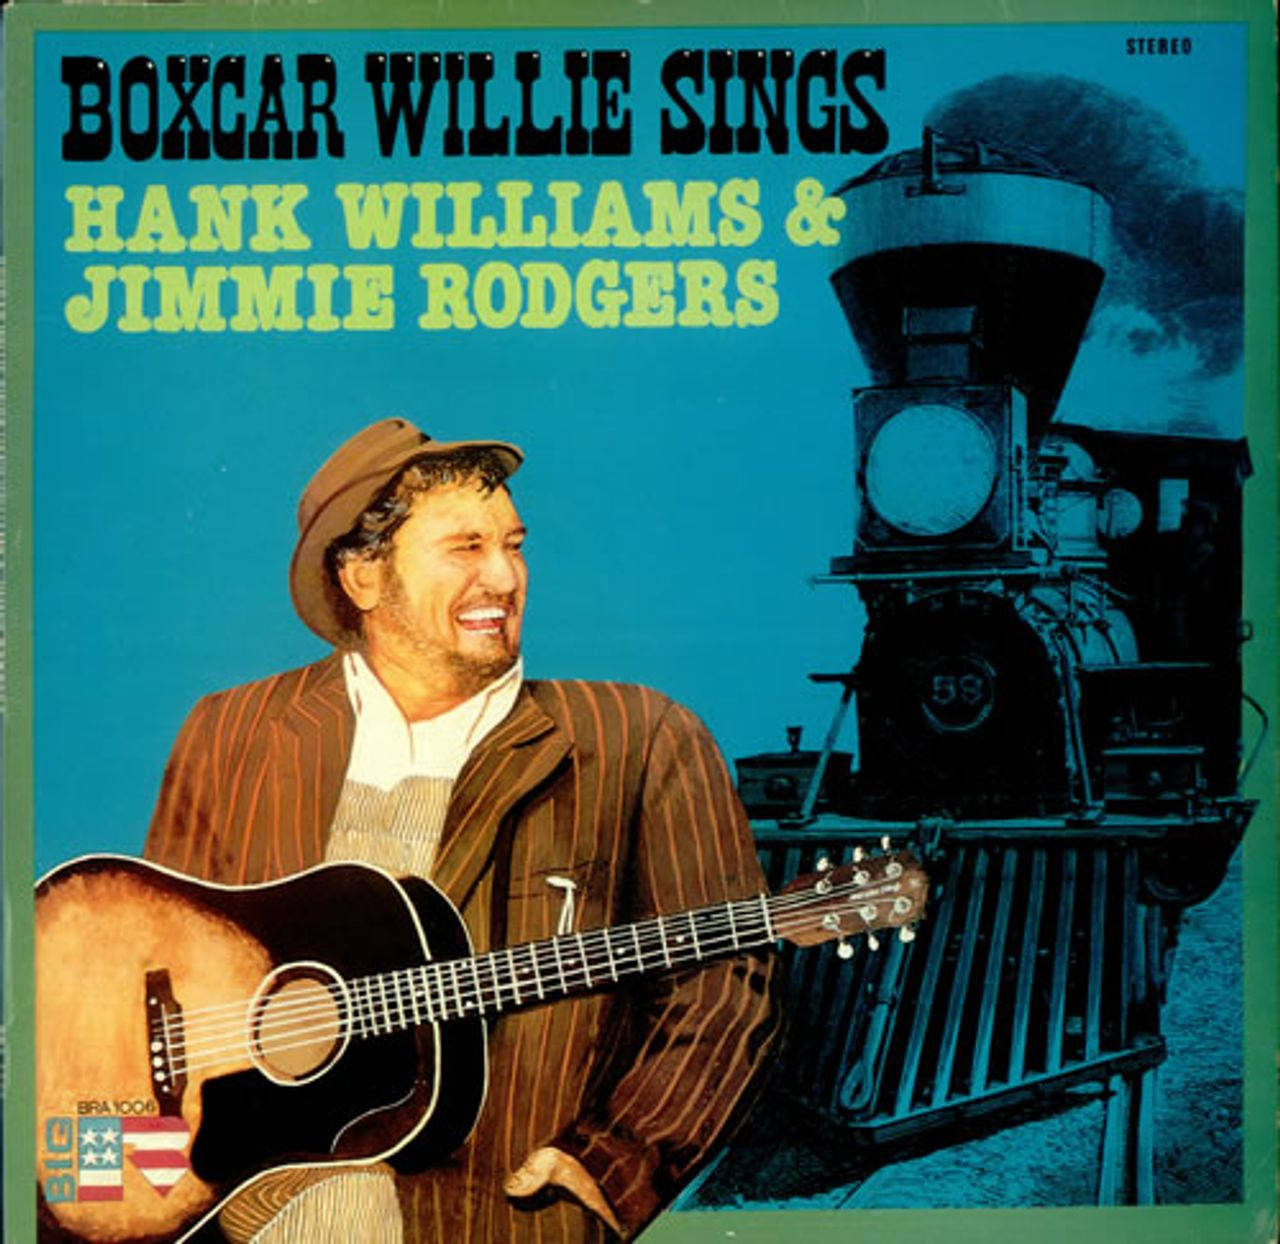 The Legendary Jimmie Rodgers' emblematic album cover by Boxcar Willie. Wallpaper